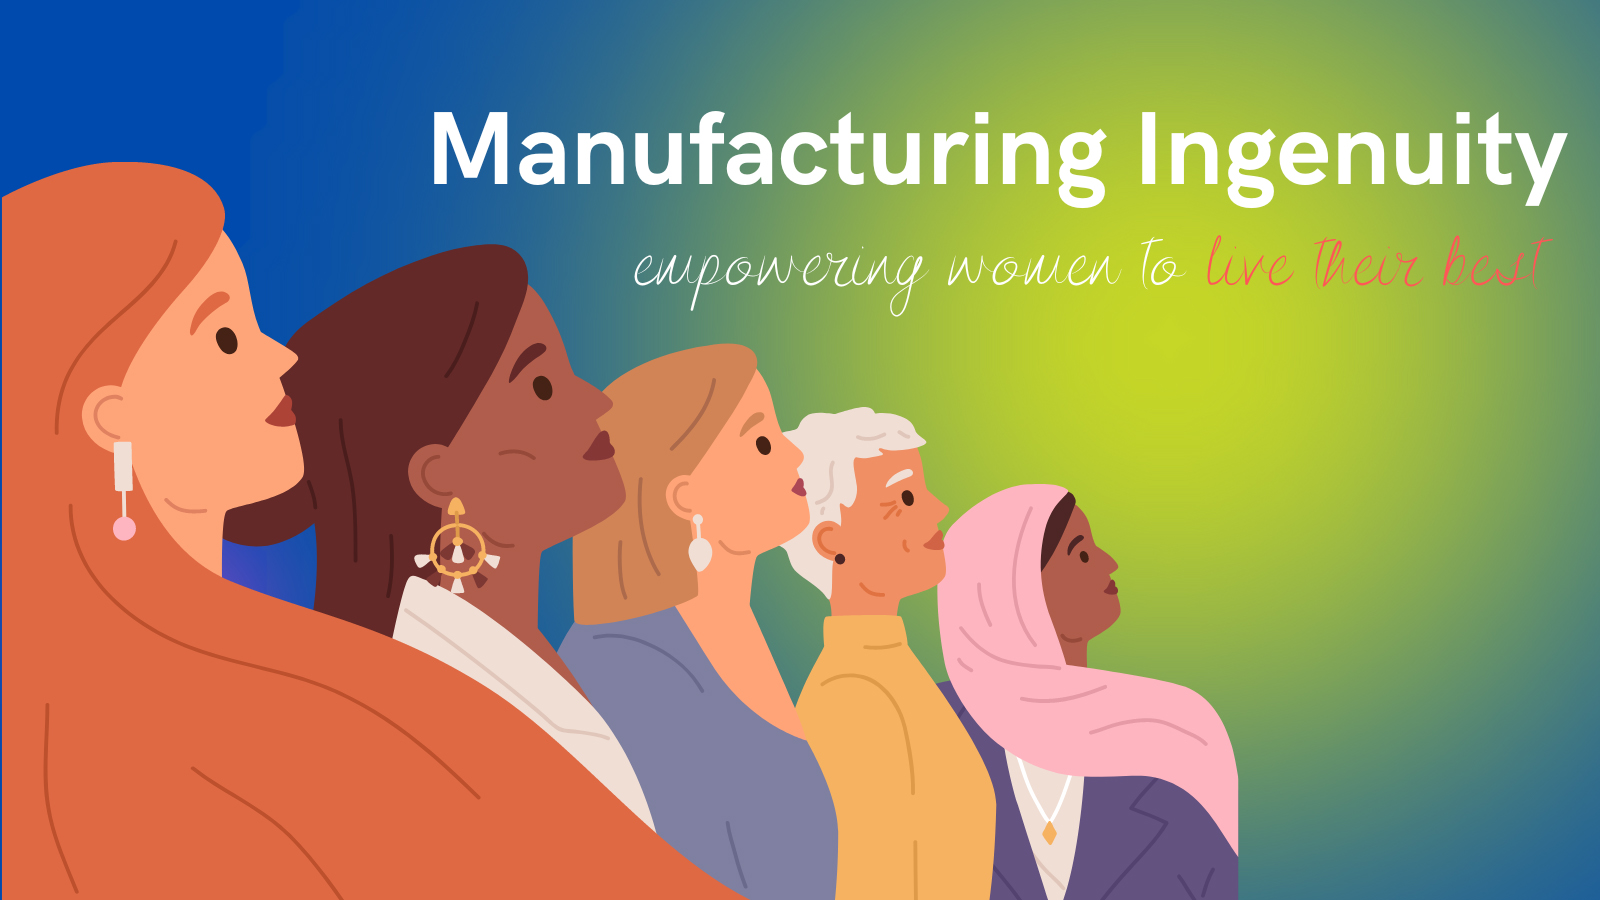 Manufacturing Ingenuity Empowering Women to Live Their Best